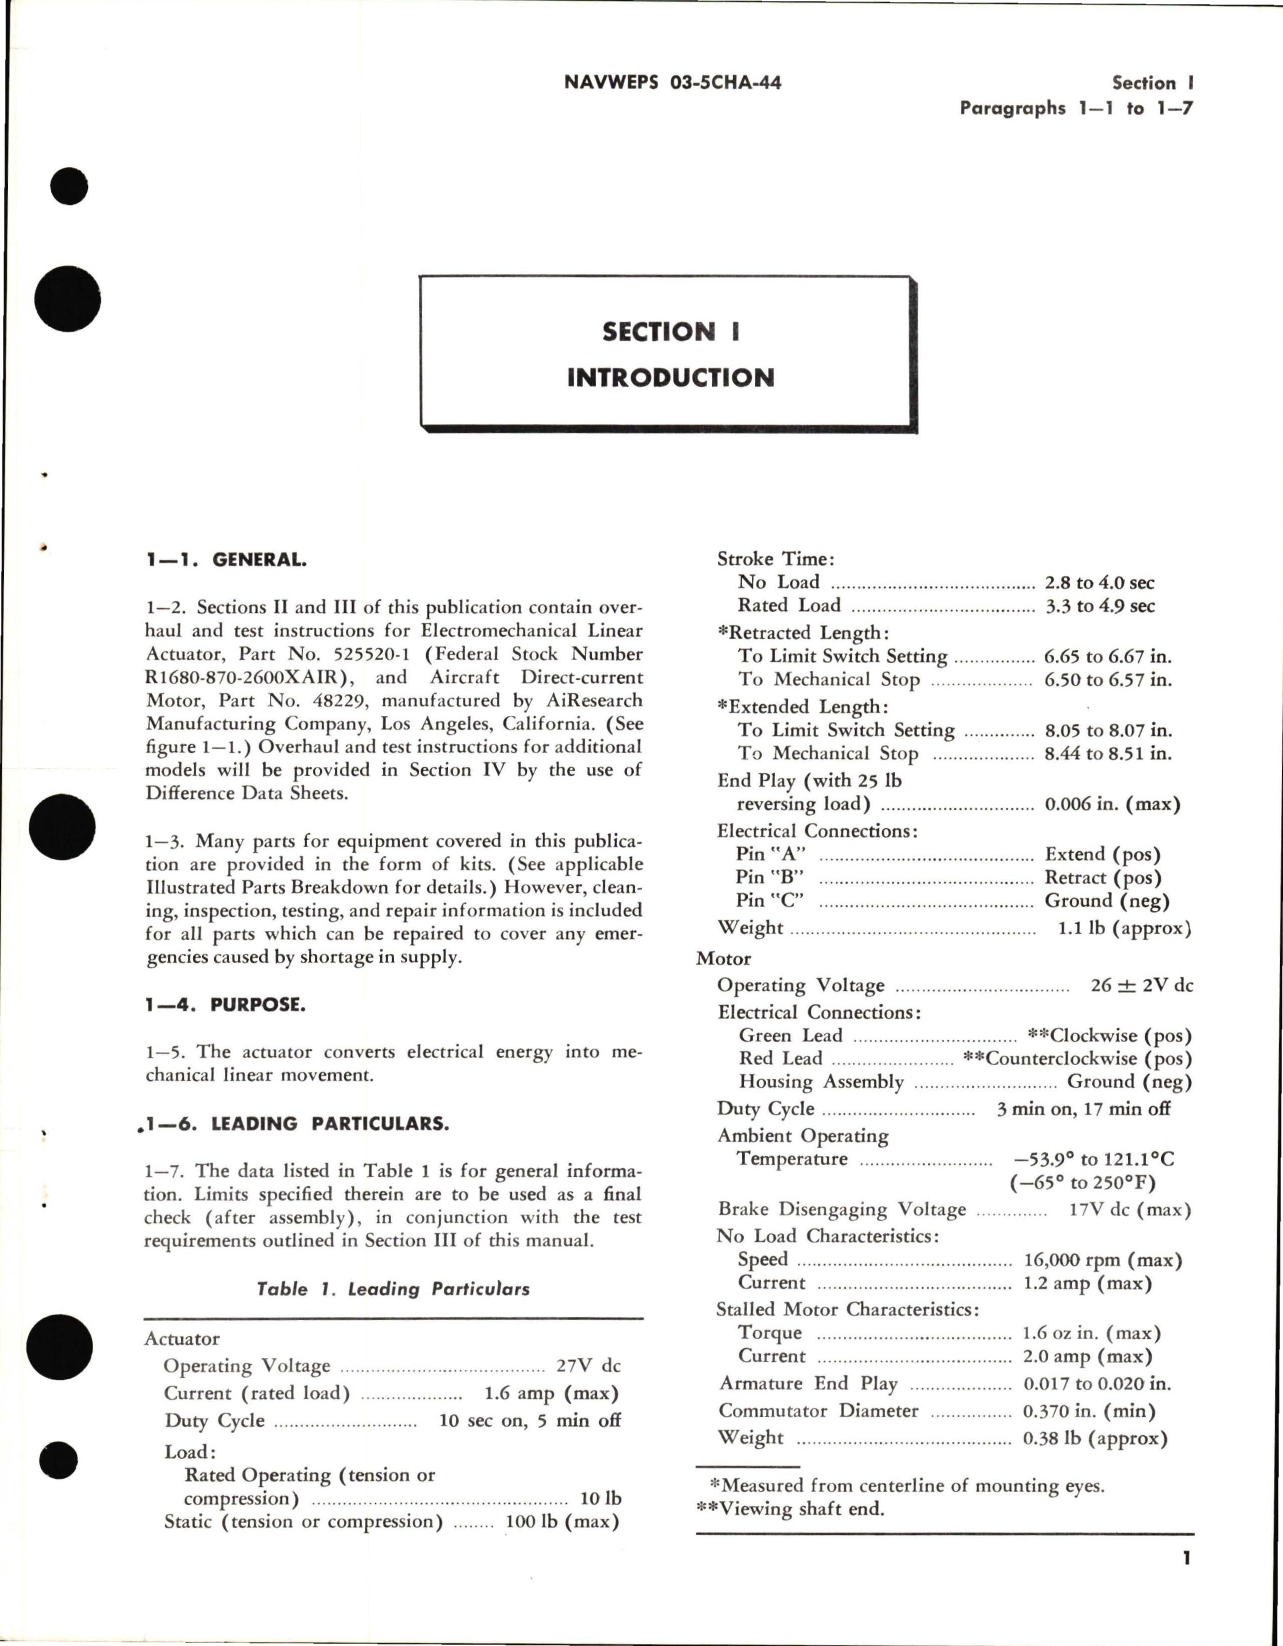 Sample page 5 from AirCorps Library document: Overhaul Instructions for Electromechanical Linear Actuator - Part 525520-1 and 48229